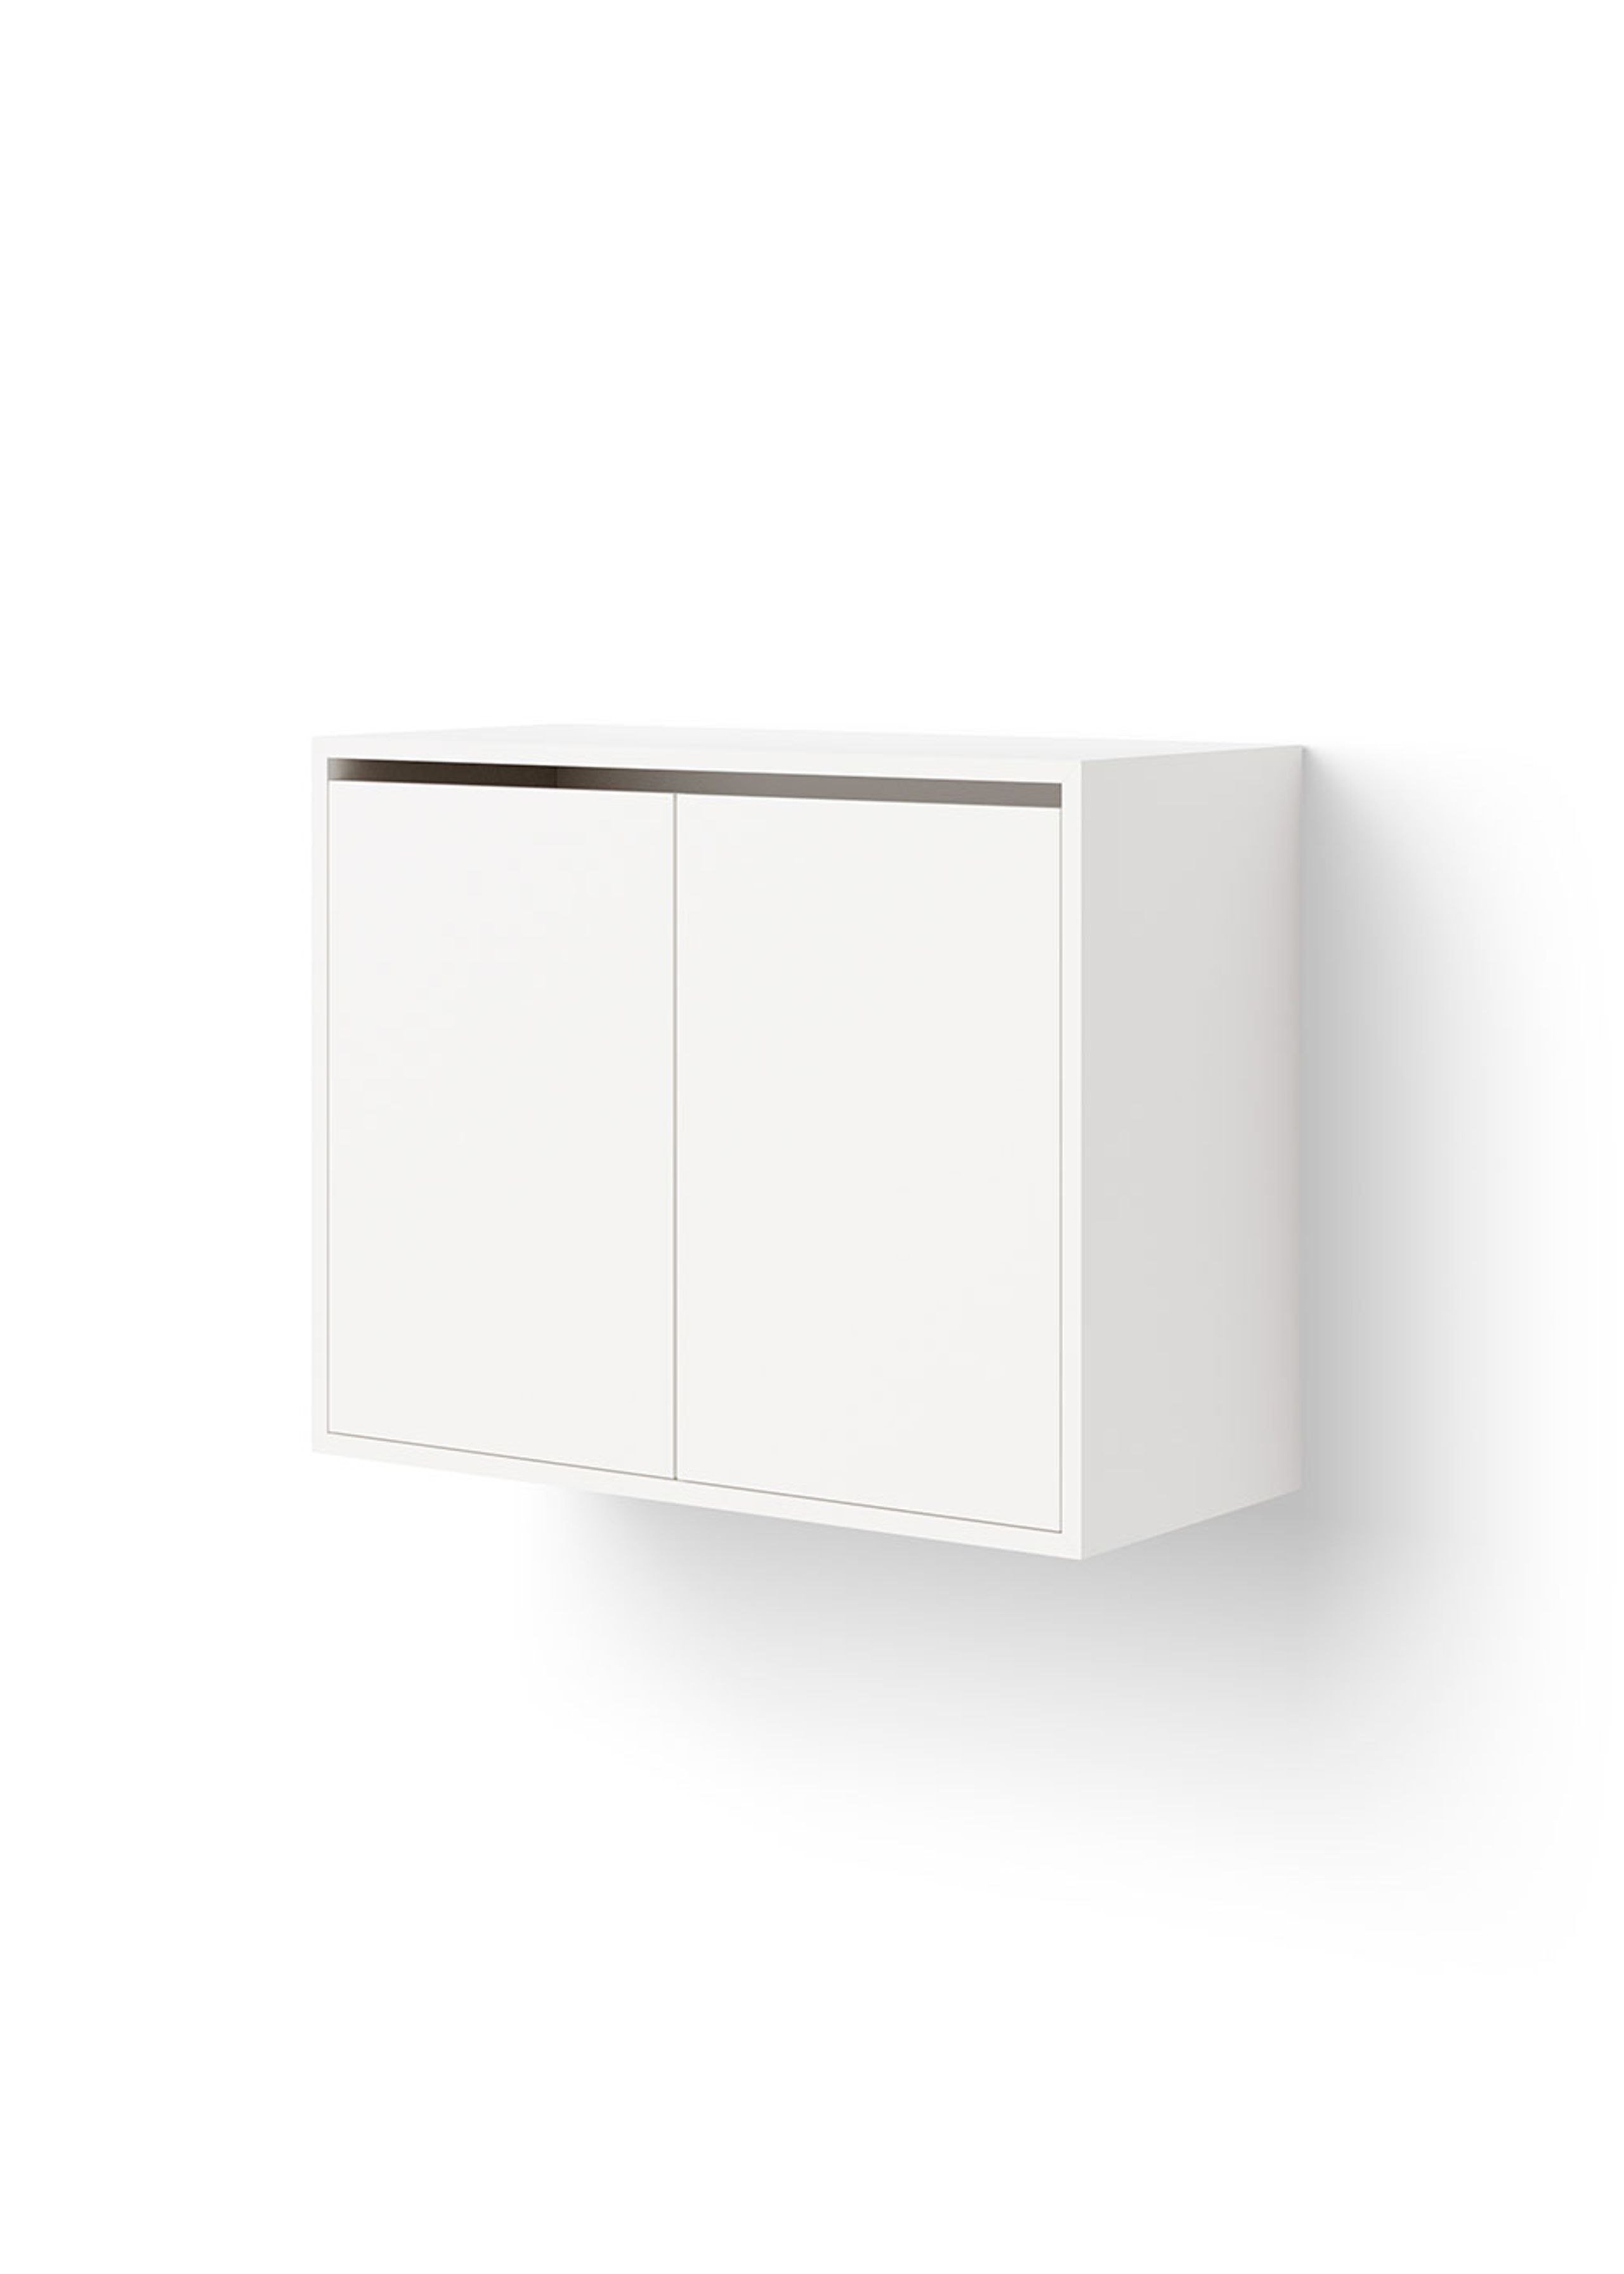 New Works - Criar - New Works Cabinet Tall w. Doors - White